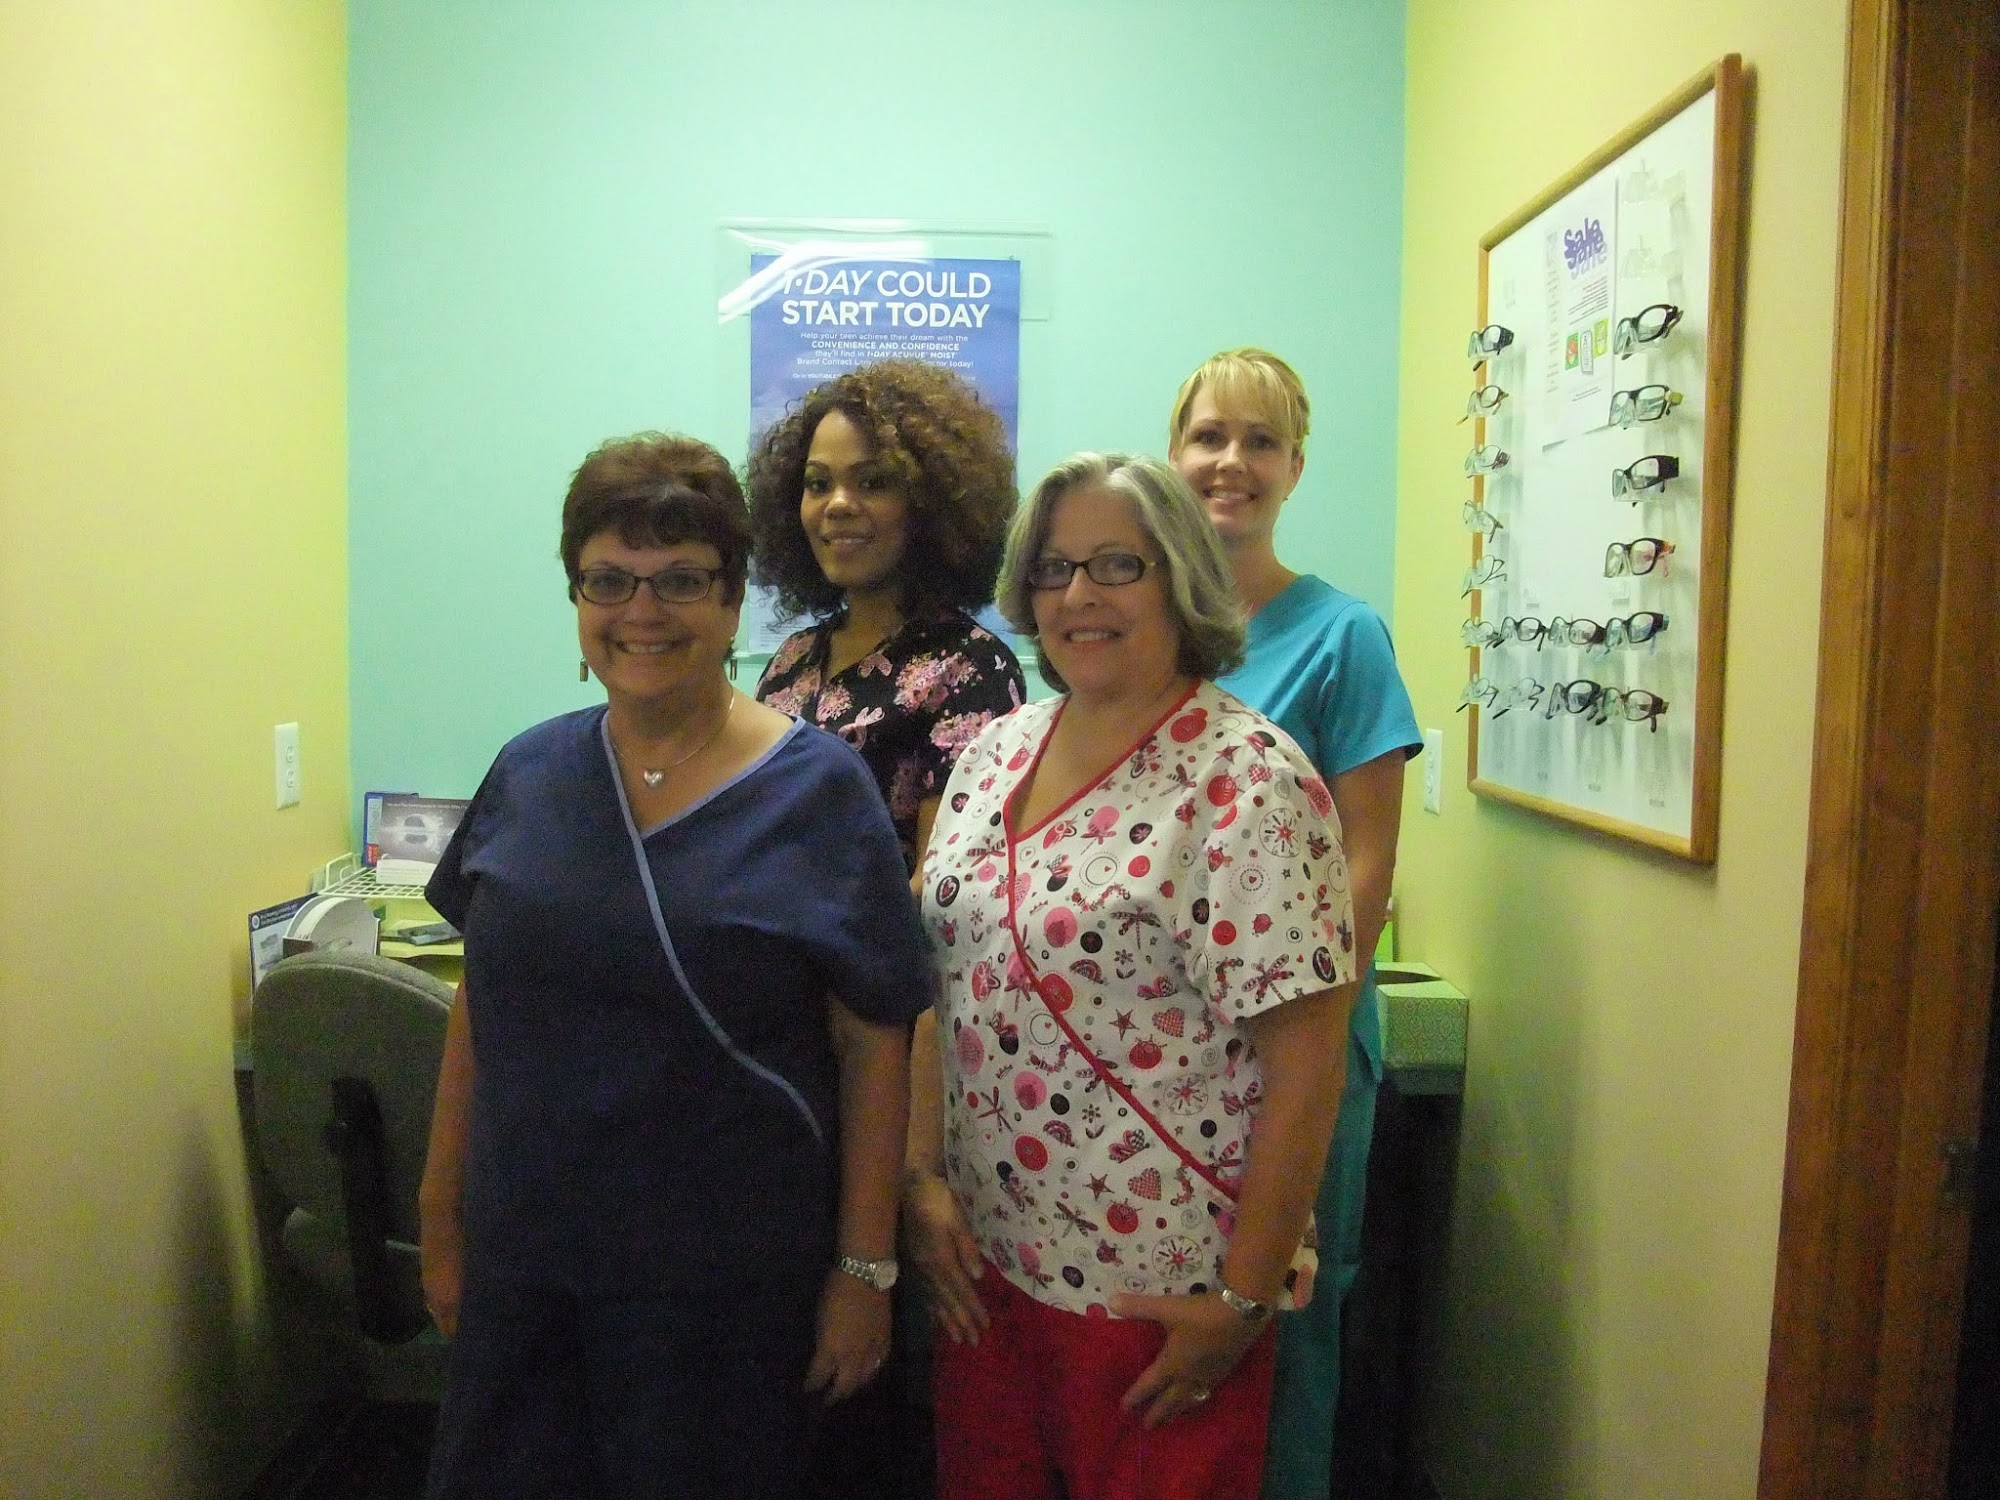 Turnersville Family Vision Care 188 Fries Mill Rd suite m-2, Turnersville New Jersey 08012